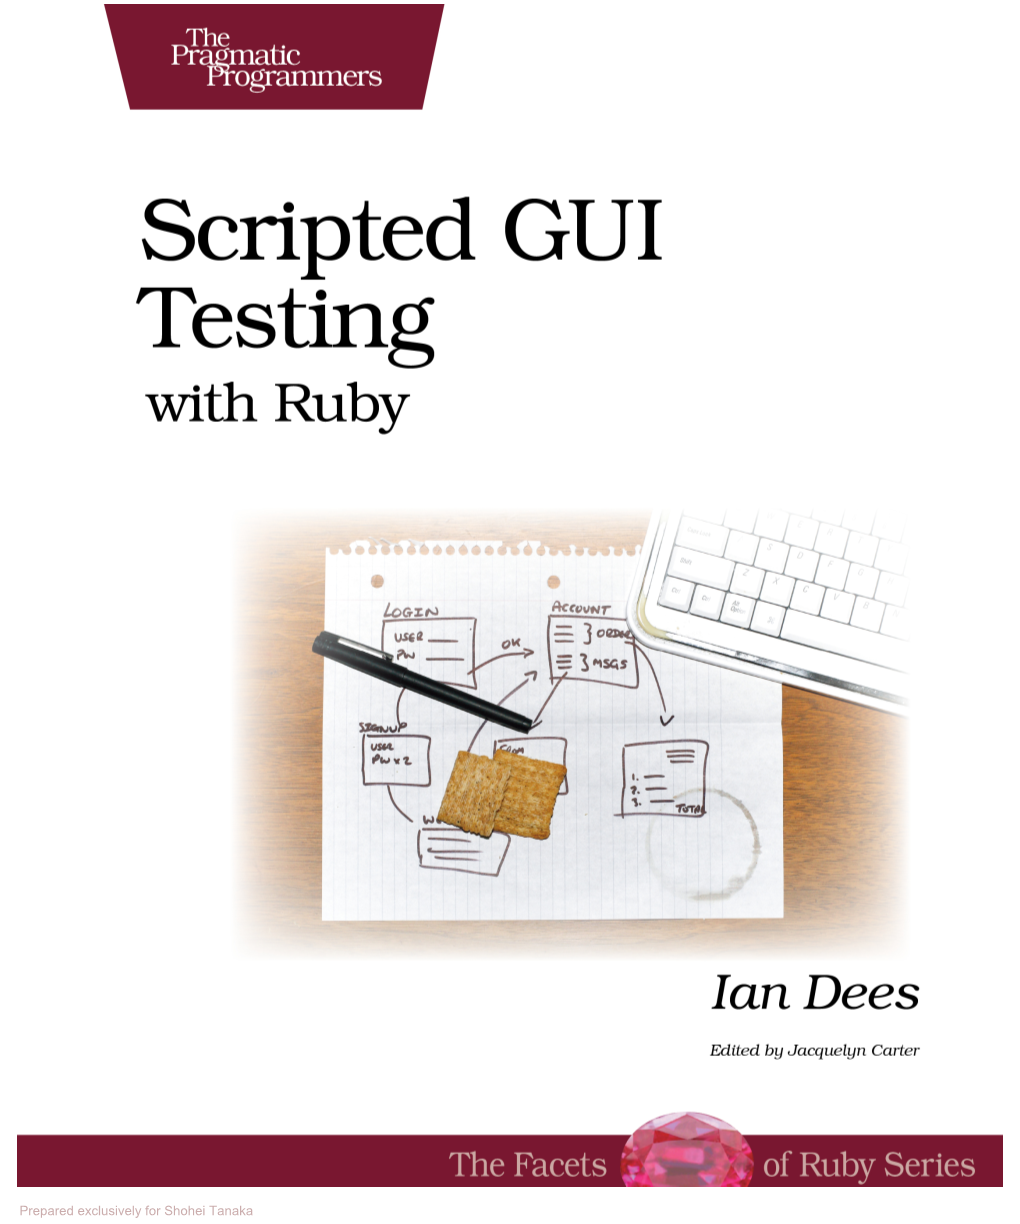 Scripted GUI Testing with Ruby